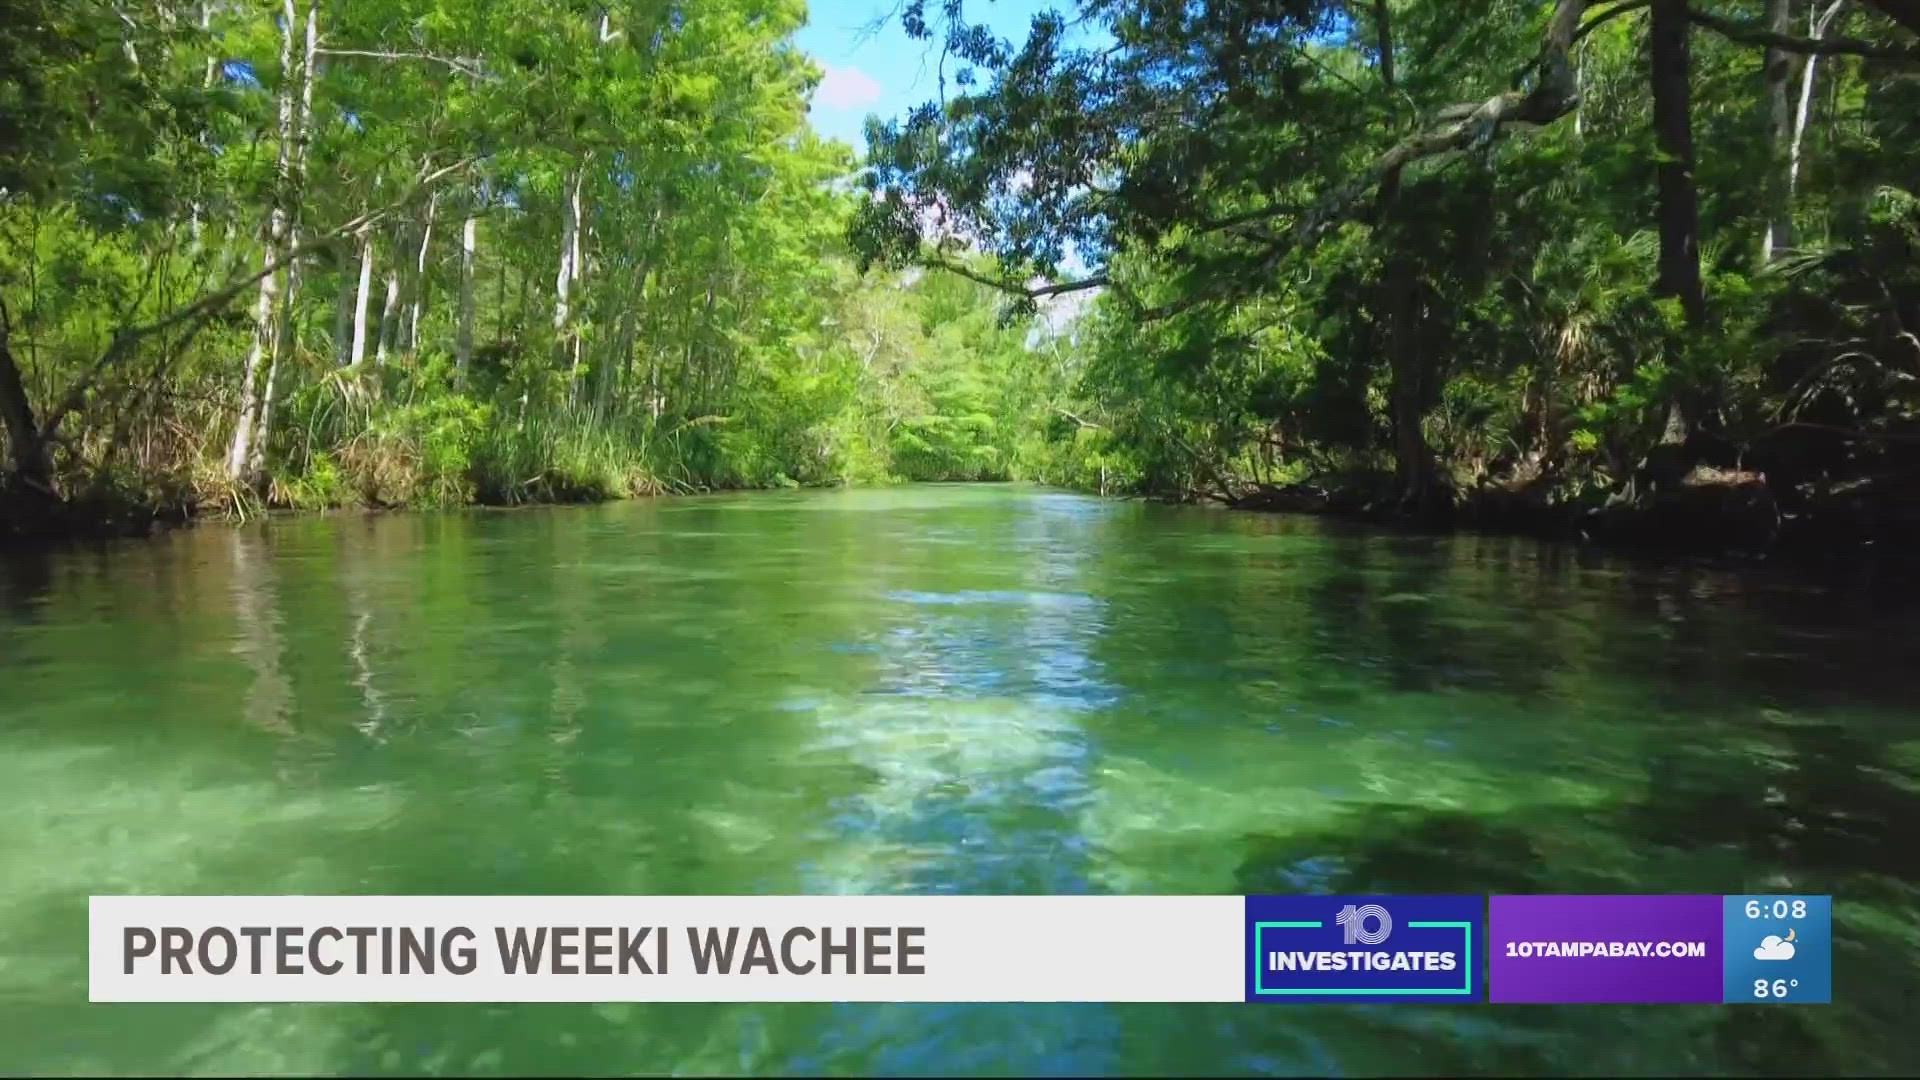 A 2020 capacity study shows this comes in part from excessive recreation on the river as Weeki Wachee becomes a growing tourist destination.